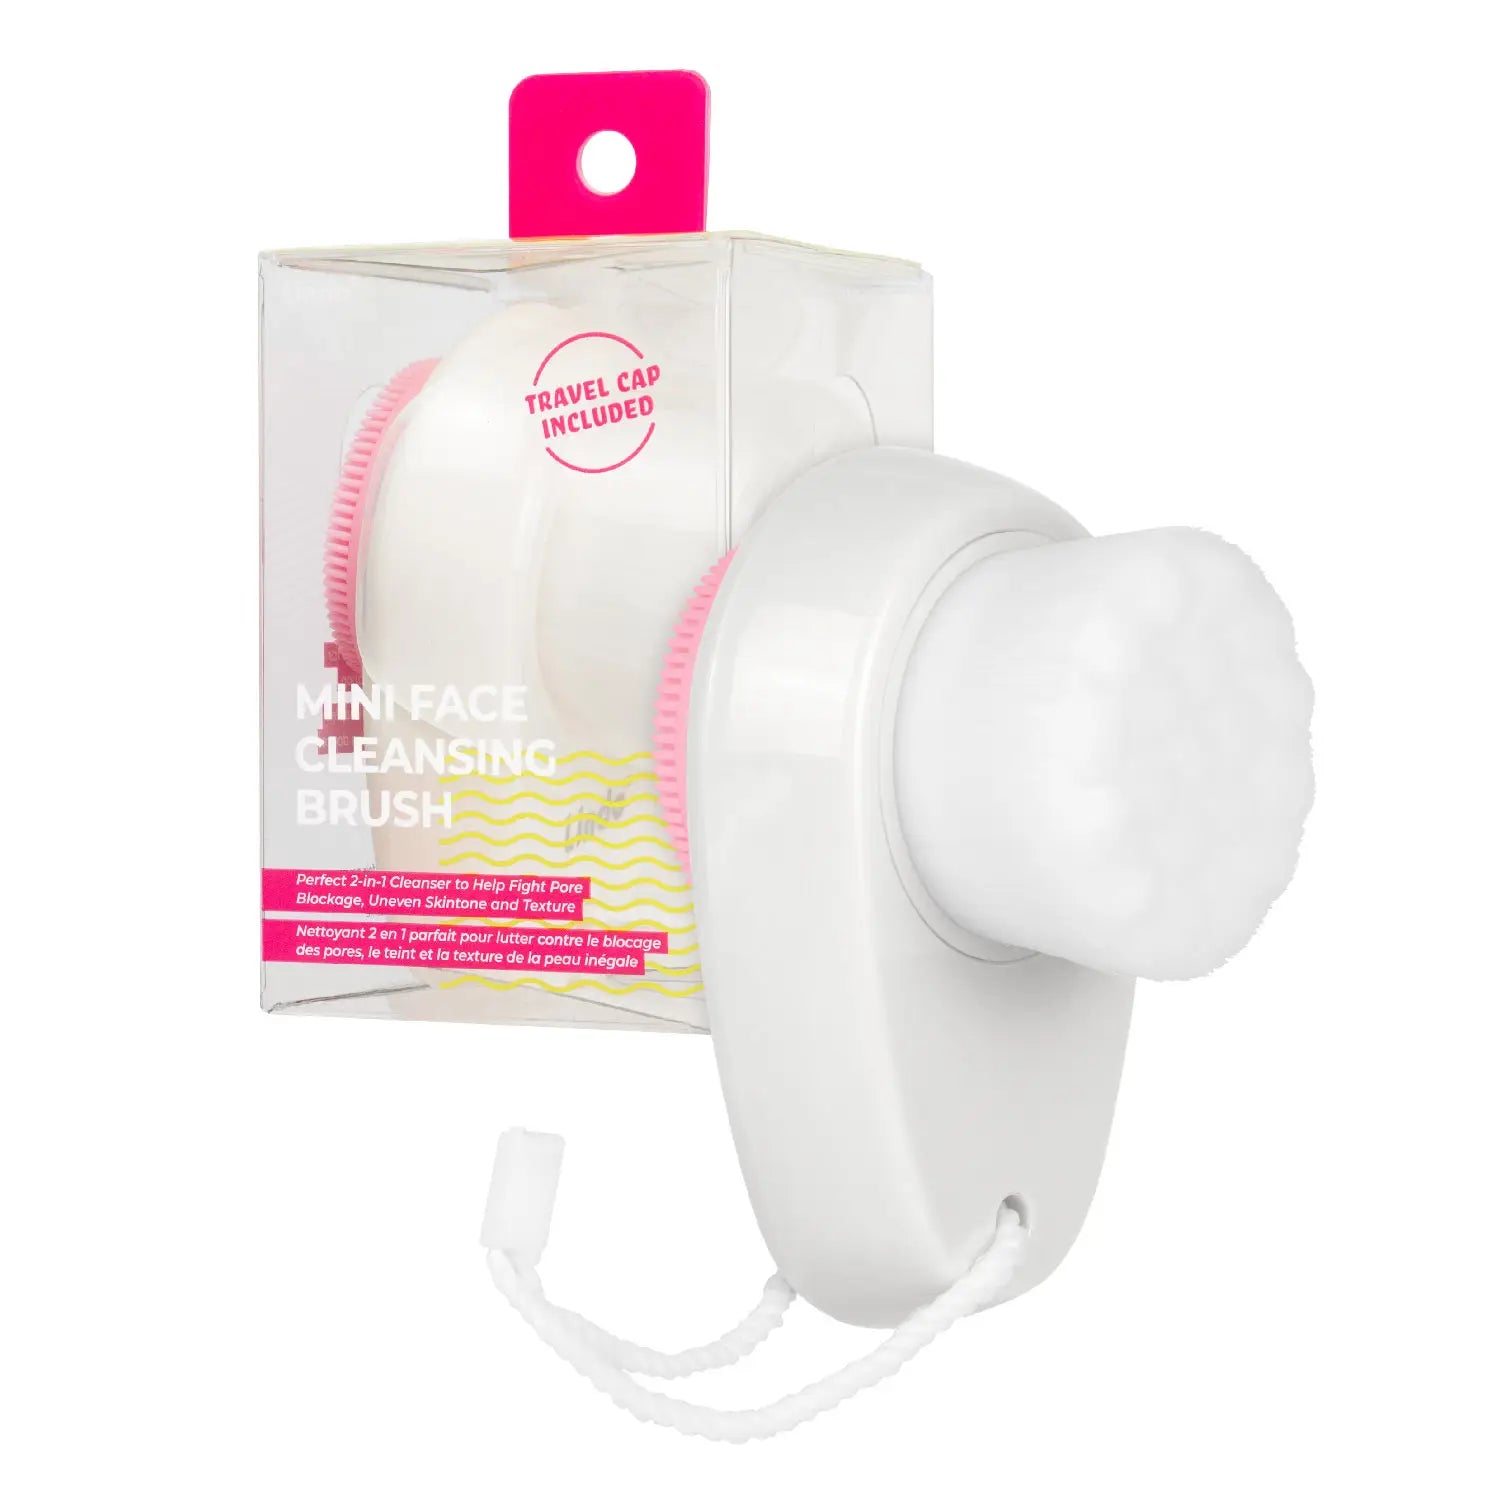 Mini Face Cleansing Brush – Elladees Boutique at Dear Yesteryear